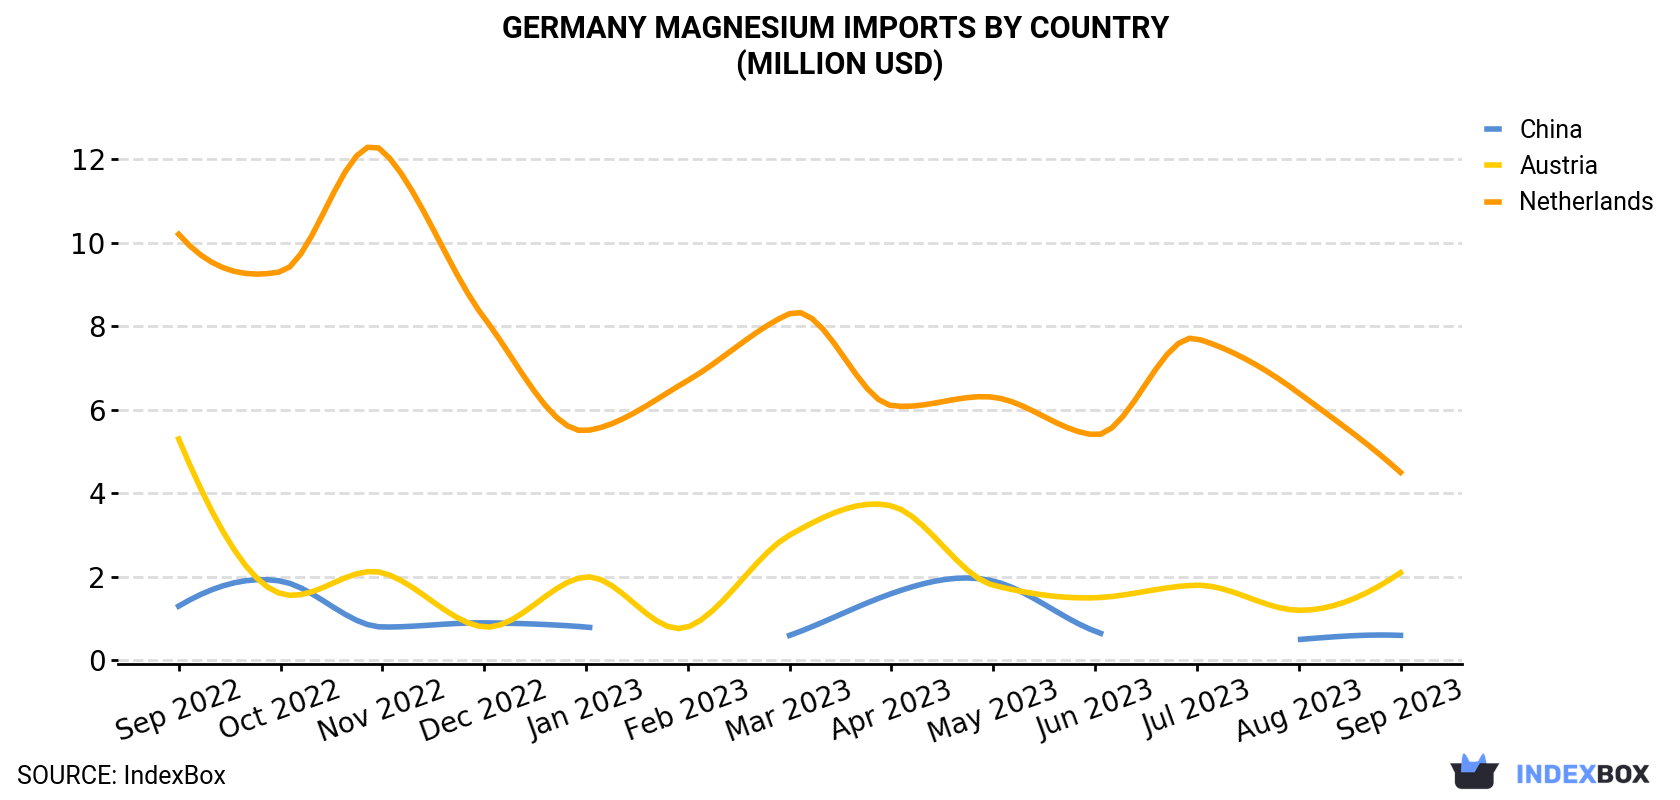 Germany Magnesium Imports By Country (Million USD)